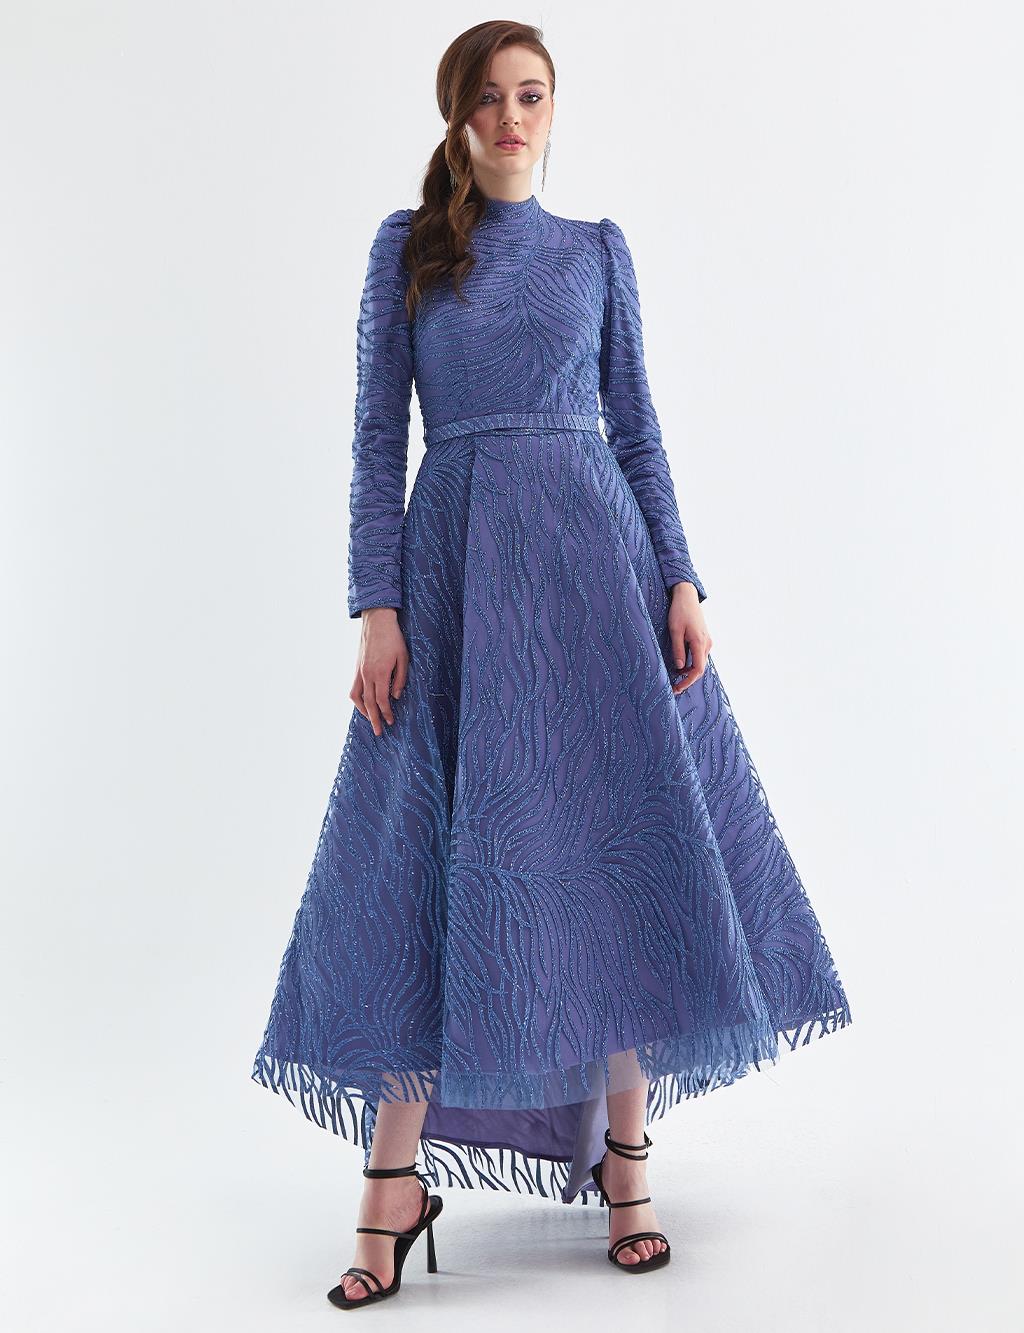 Embroidered Tulle Covered Evening Dress Indigo LA